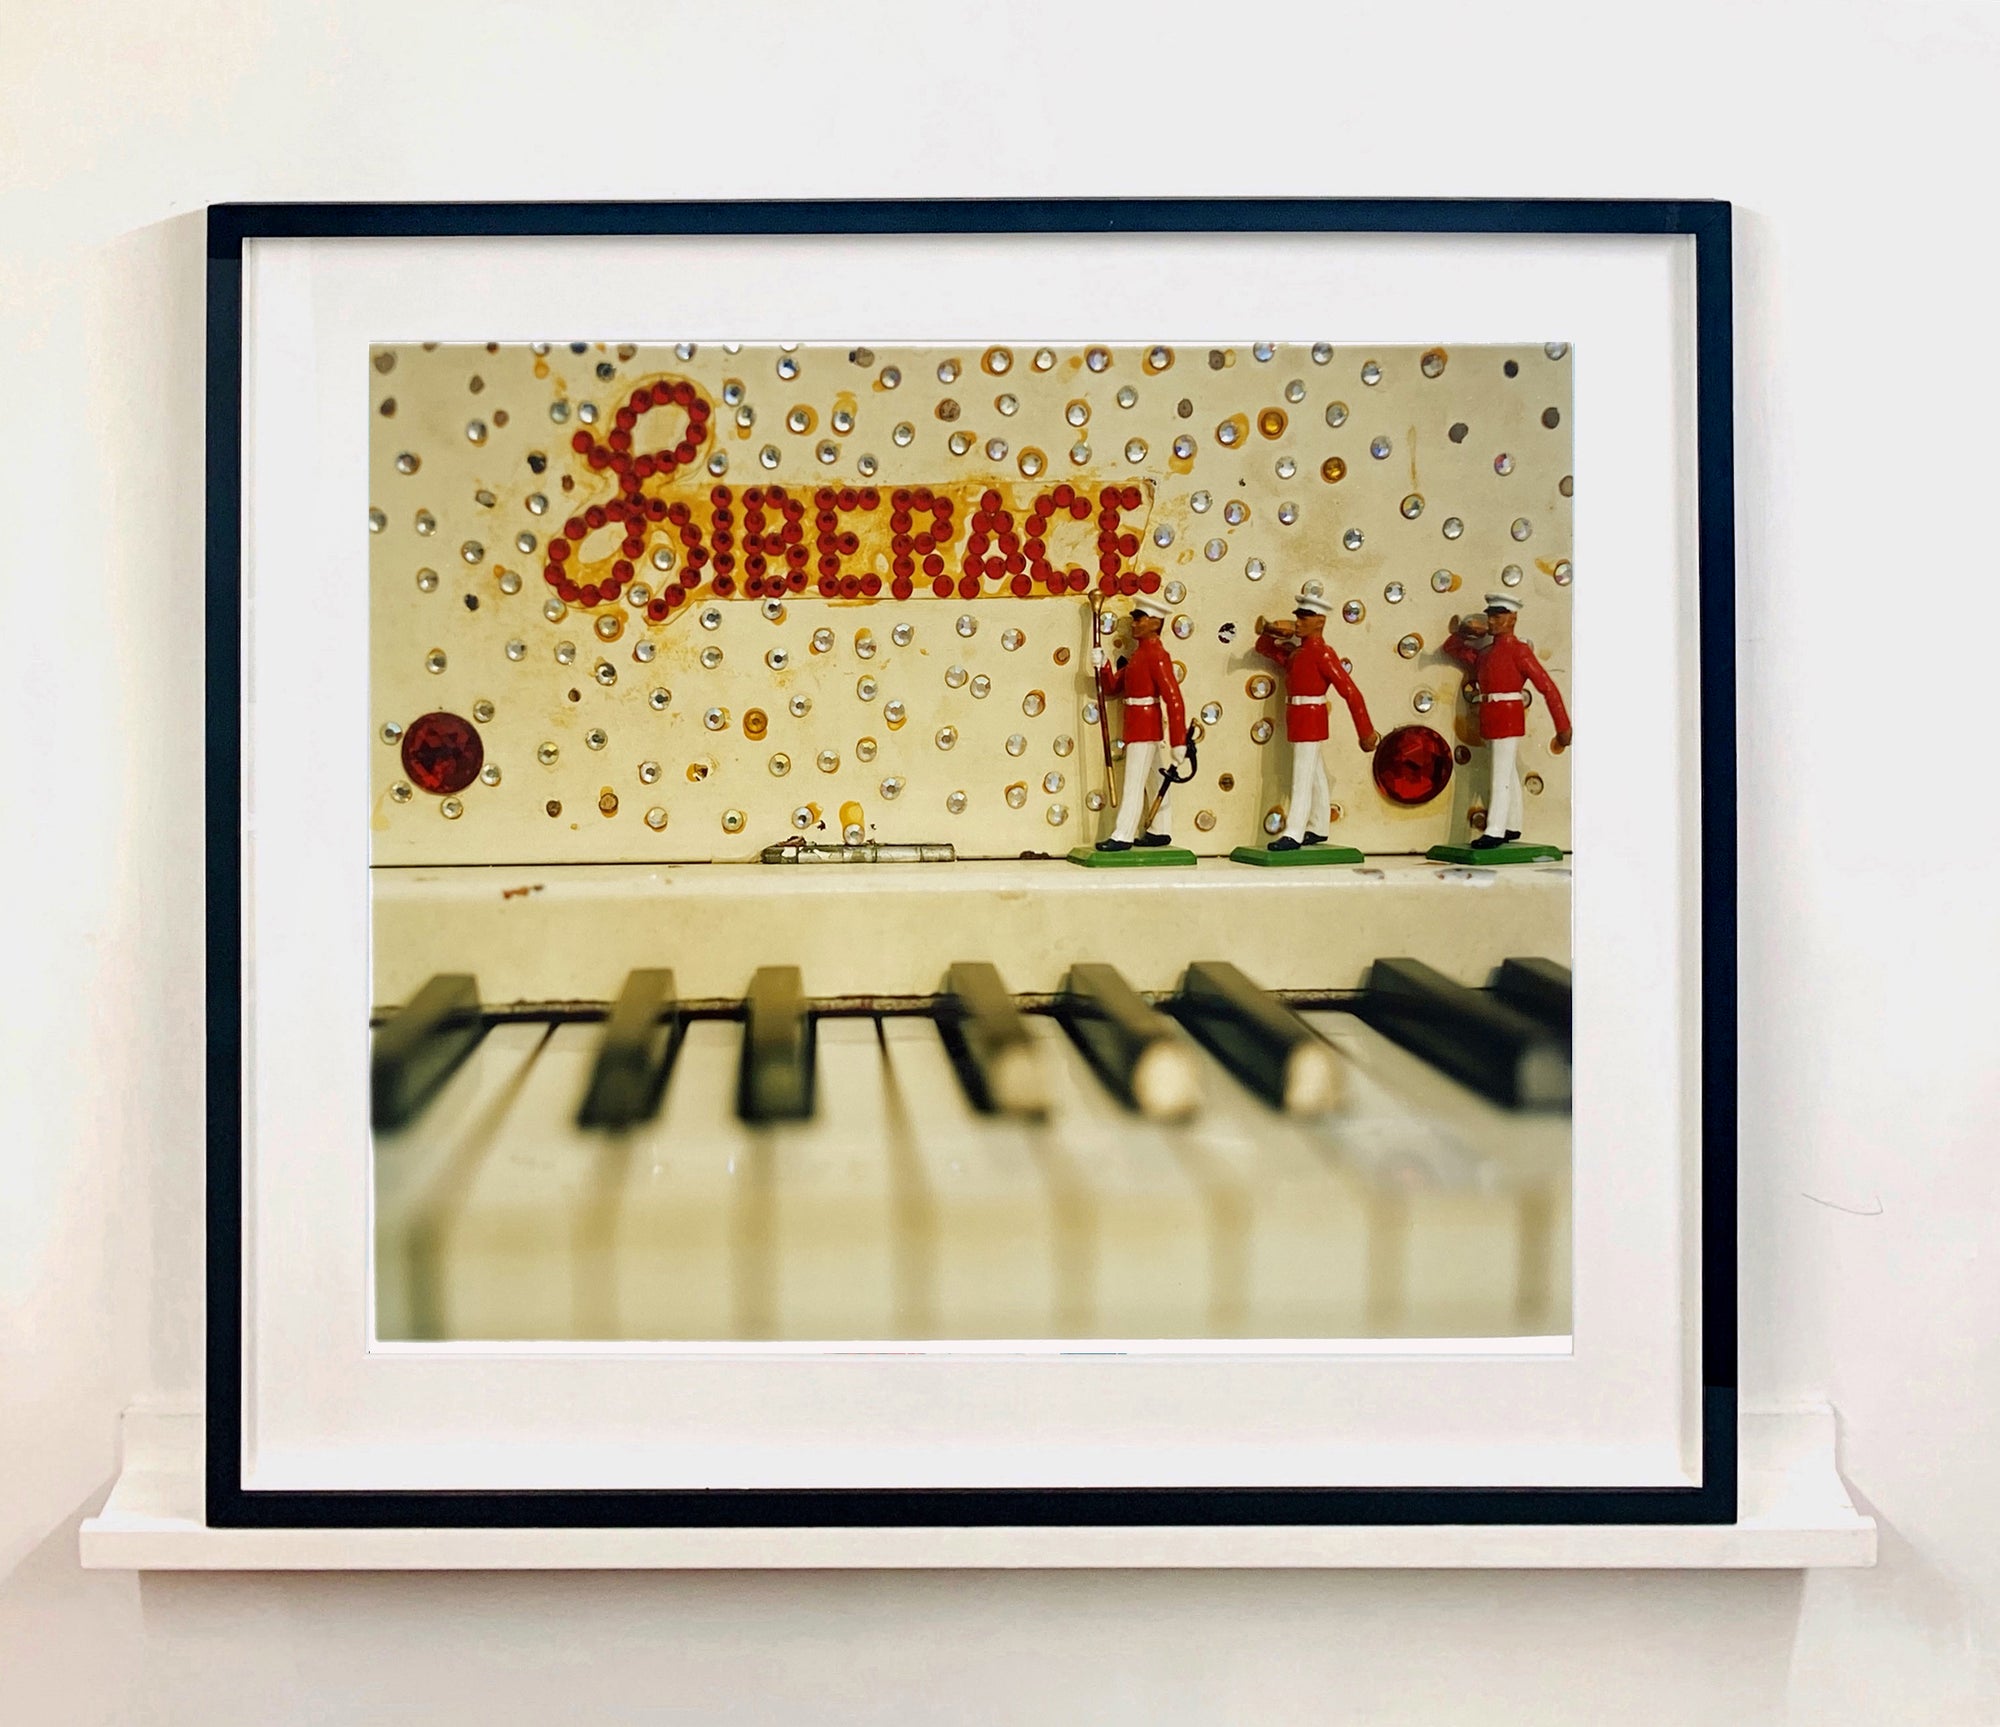 Liberace's Piano, part of Richard Heeps 'Dream in Colour' Series, it has an archetypal Las Vegas feel, featuring marching band and piano keys.